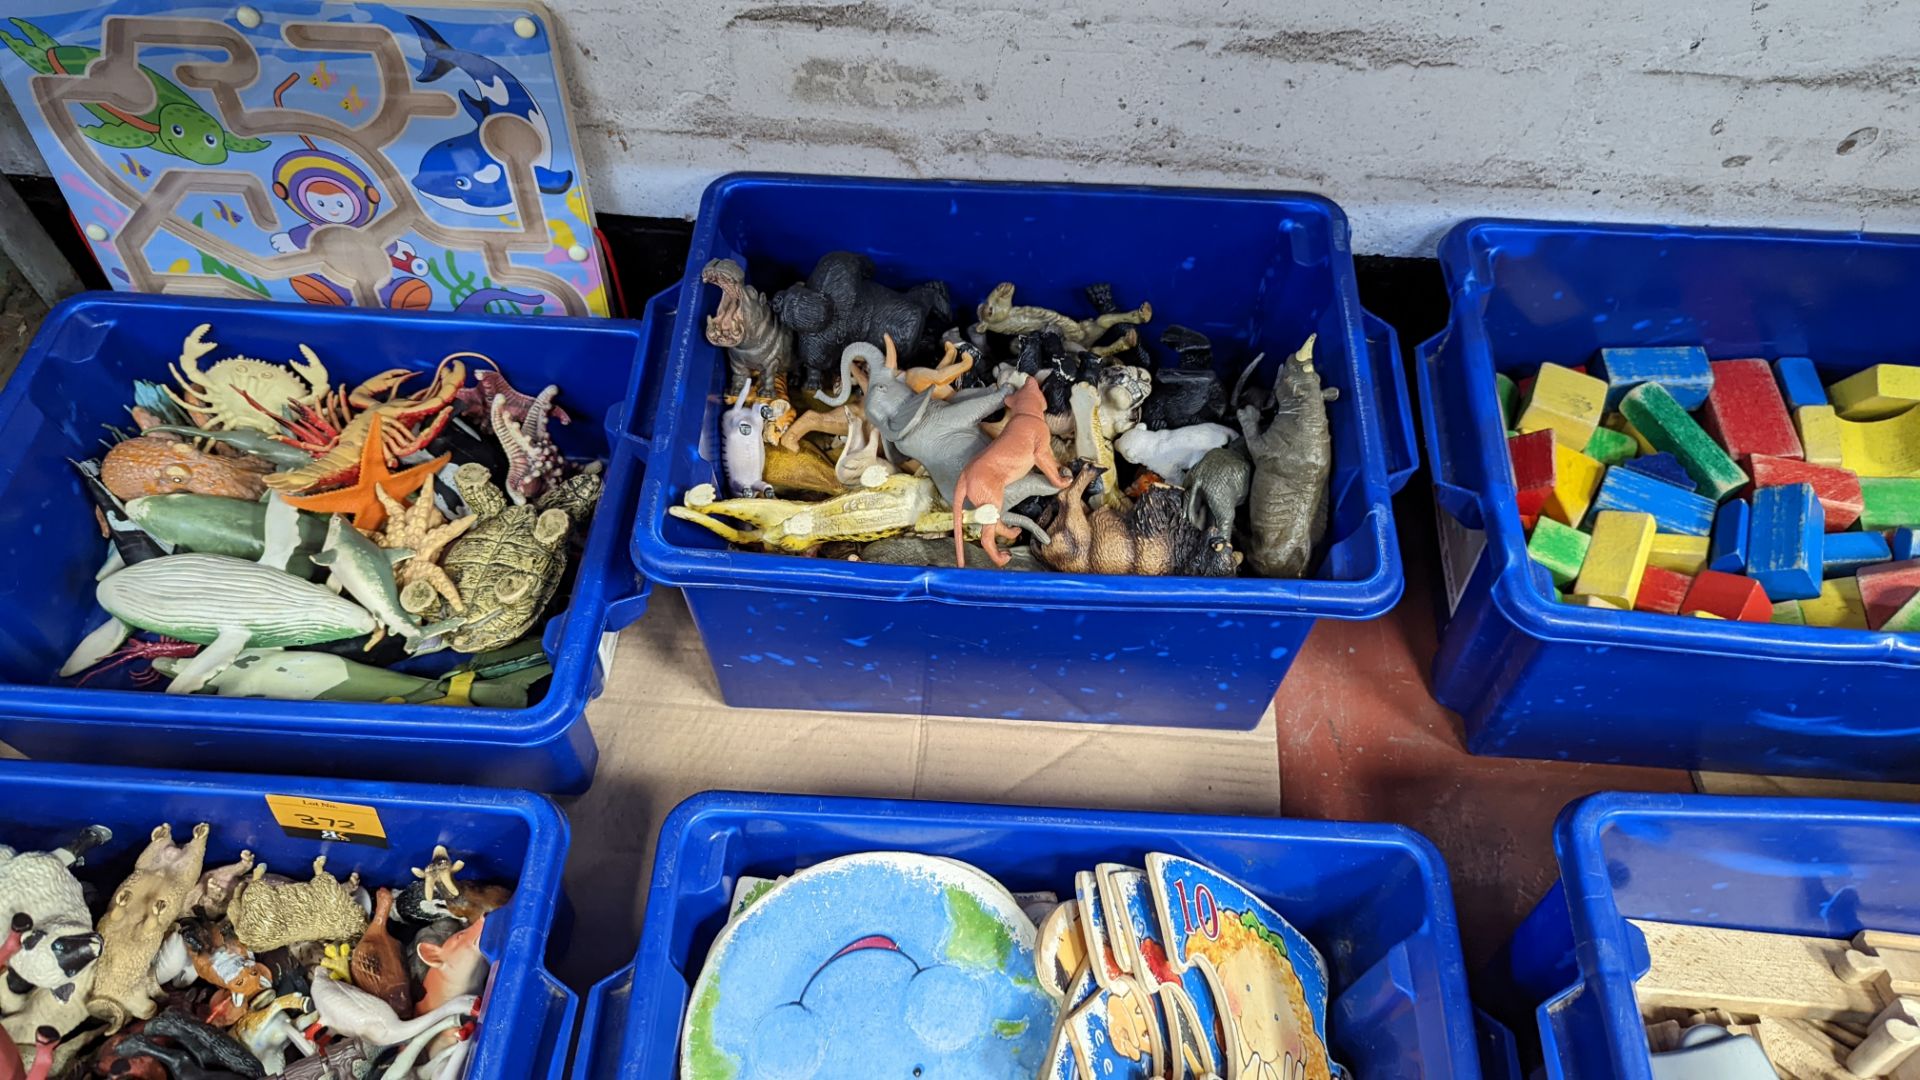 Contents of a bay of children's toys - all crates included - Image 7 of 14